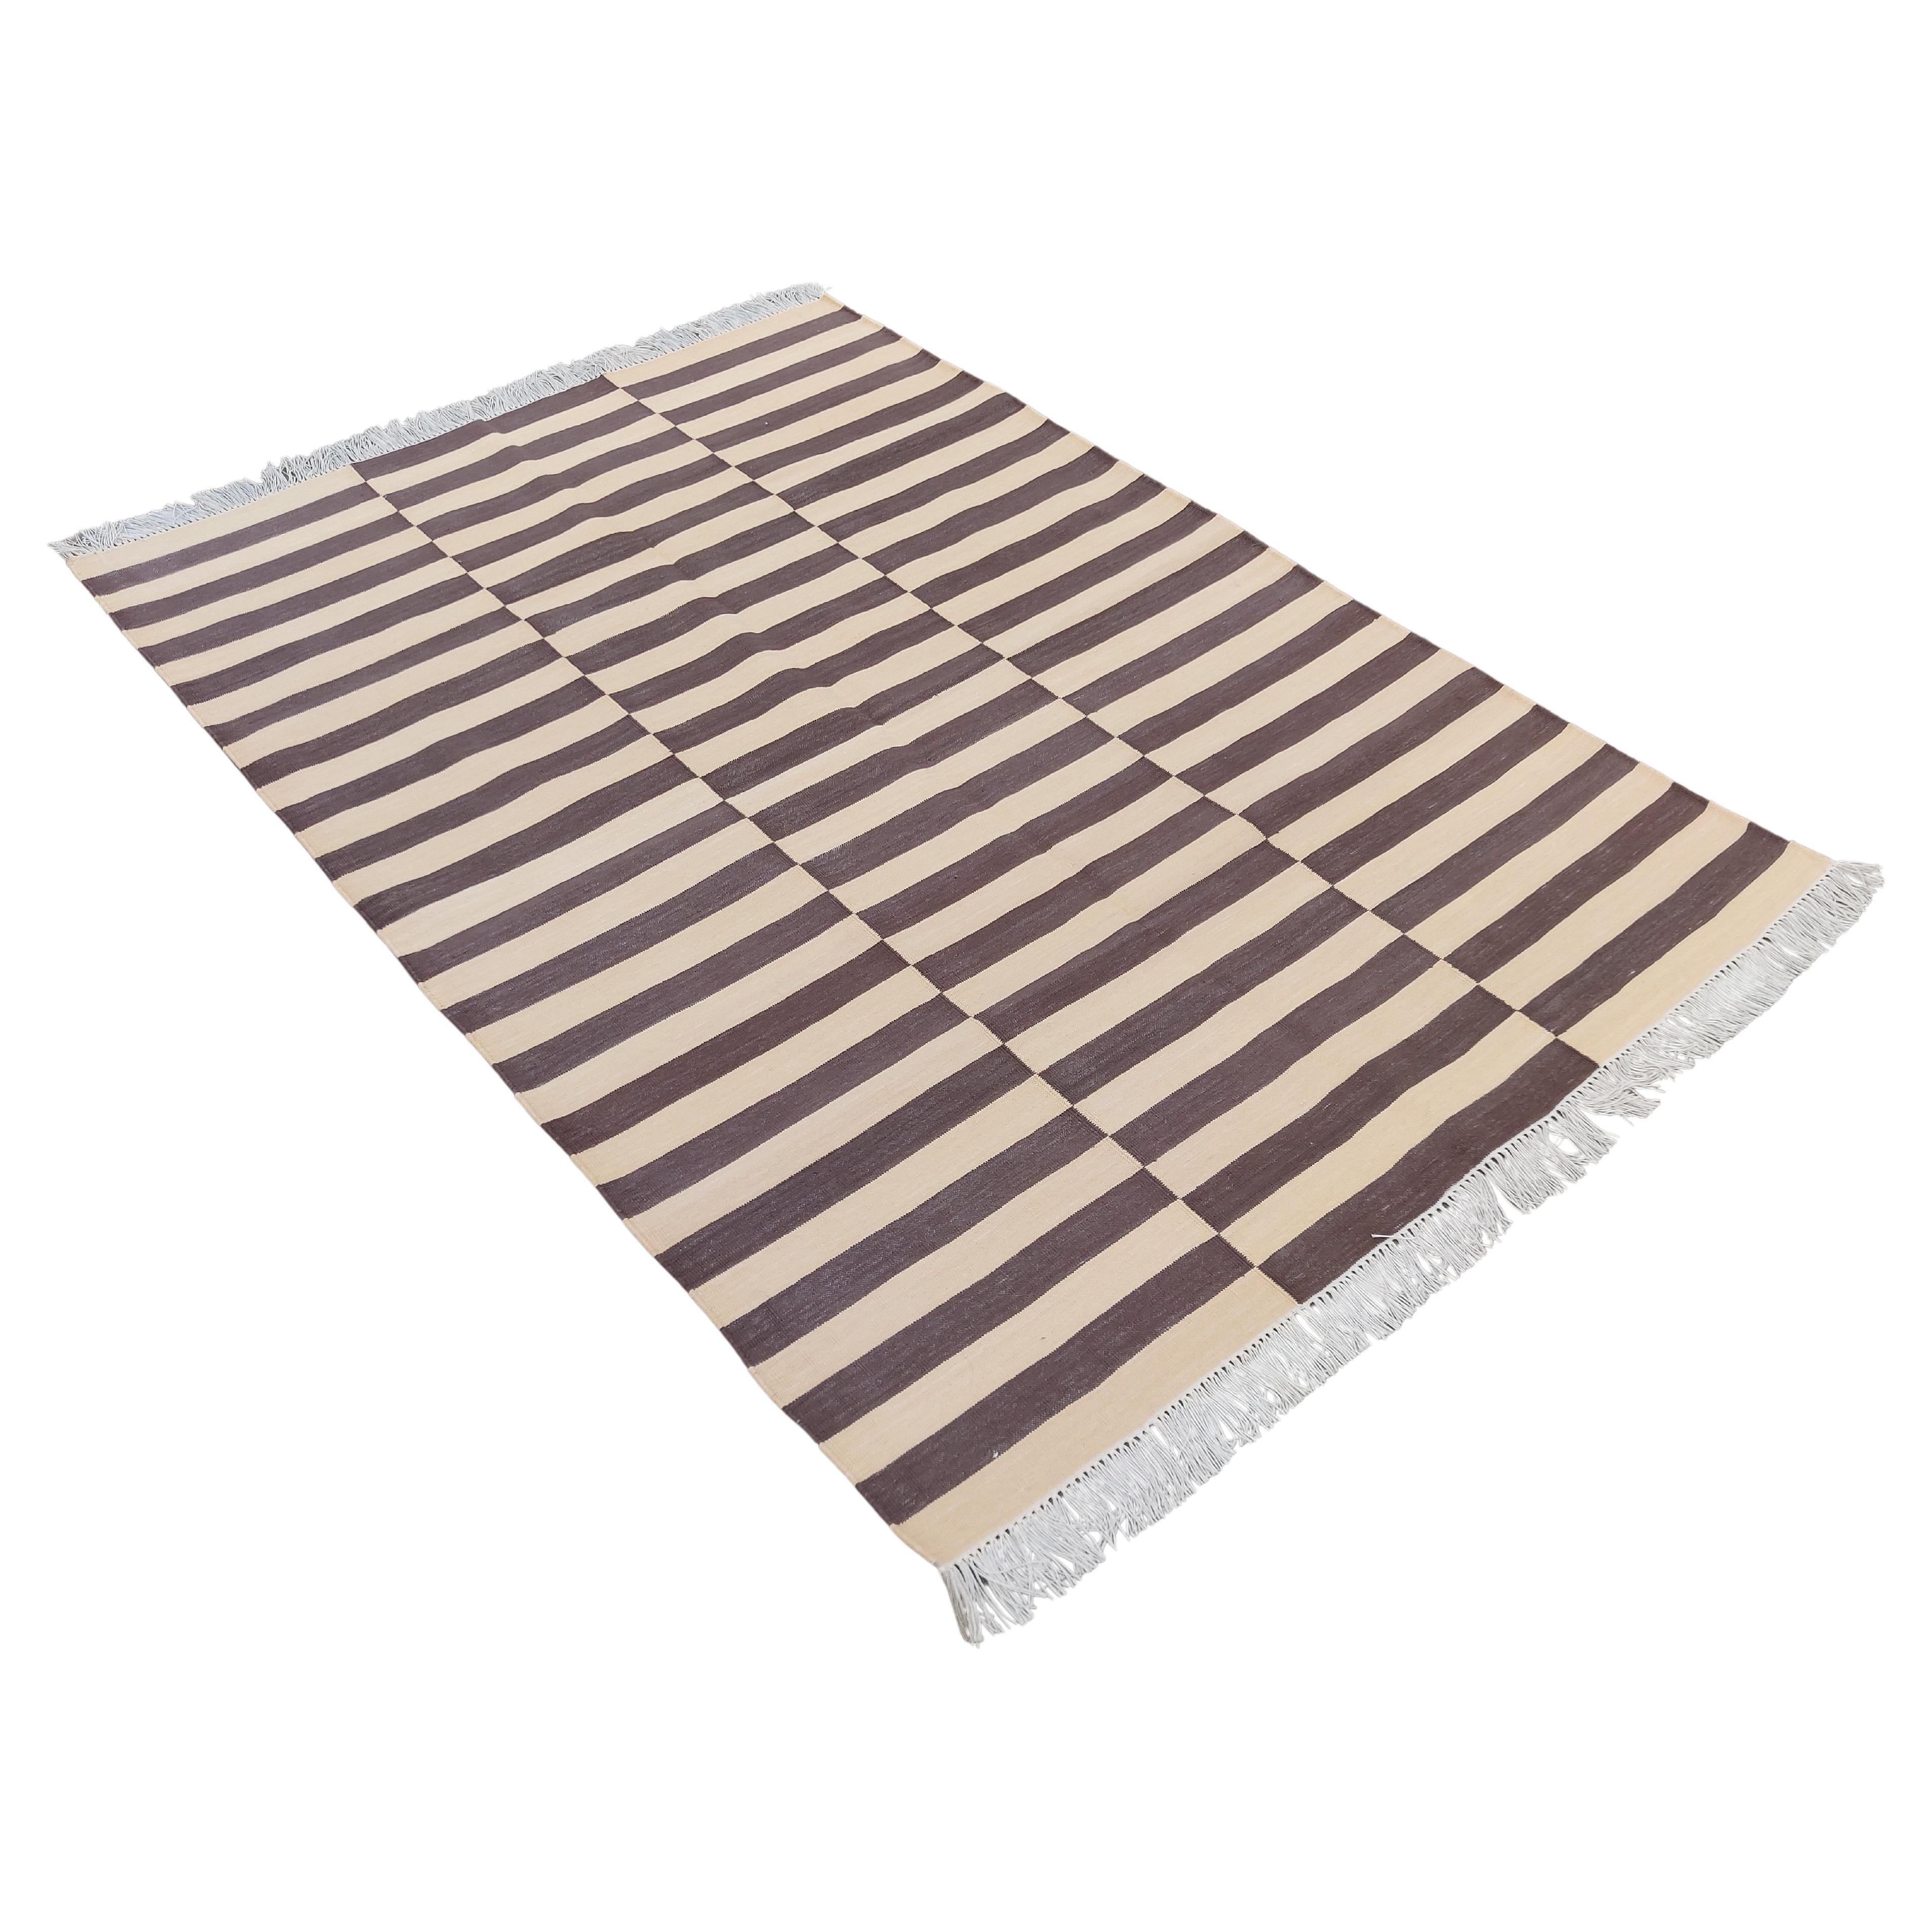 Handmade Cotton Area Flat Weave Rug, 4x6 Brown And Cream Striped Indian Dhurrie For Sale